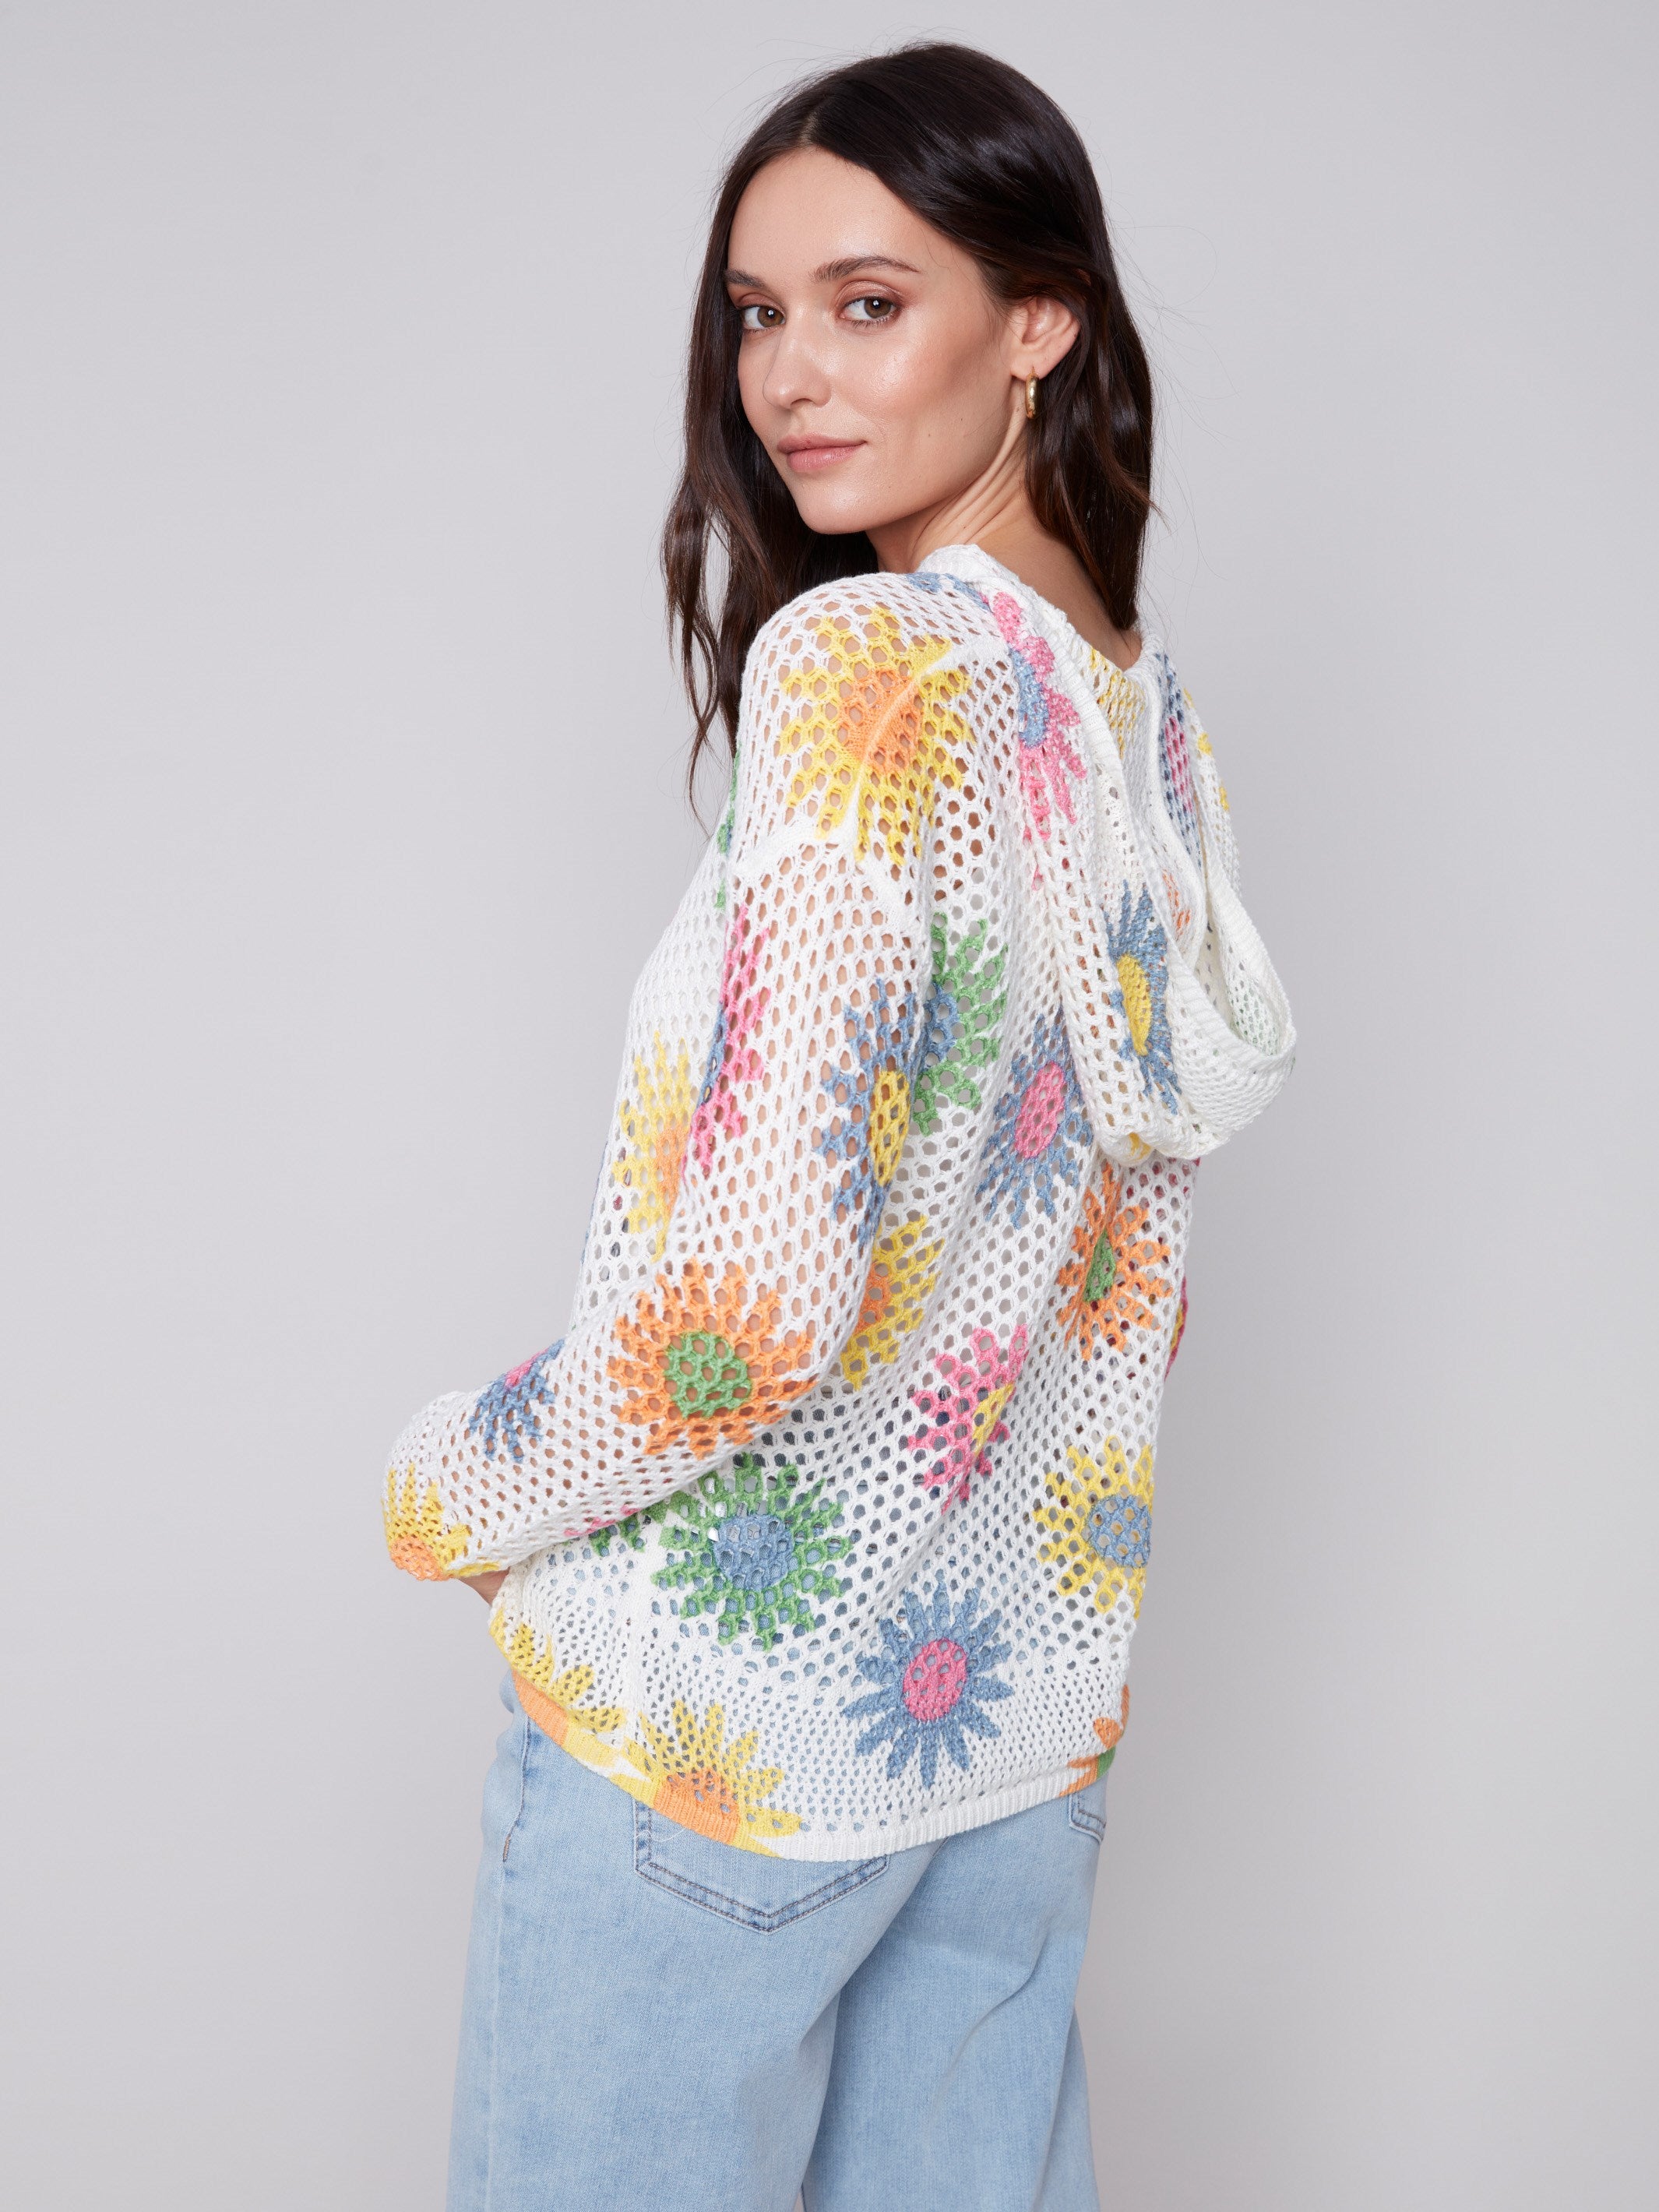 Printed Fishnet Crochet Hoodie Sweater - Daisies - Charlie B Collection Canada - Image 2